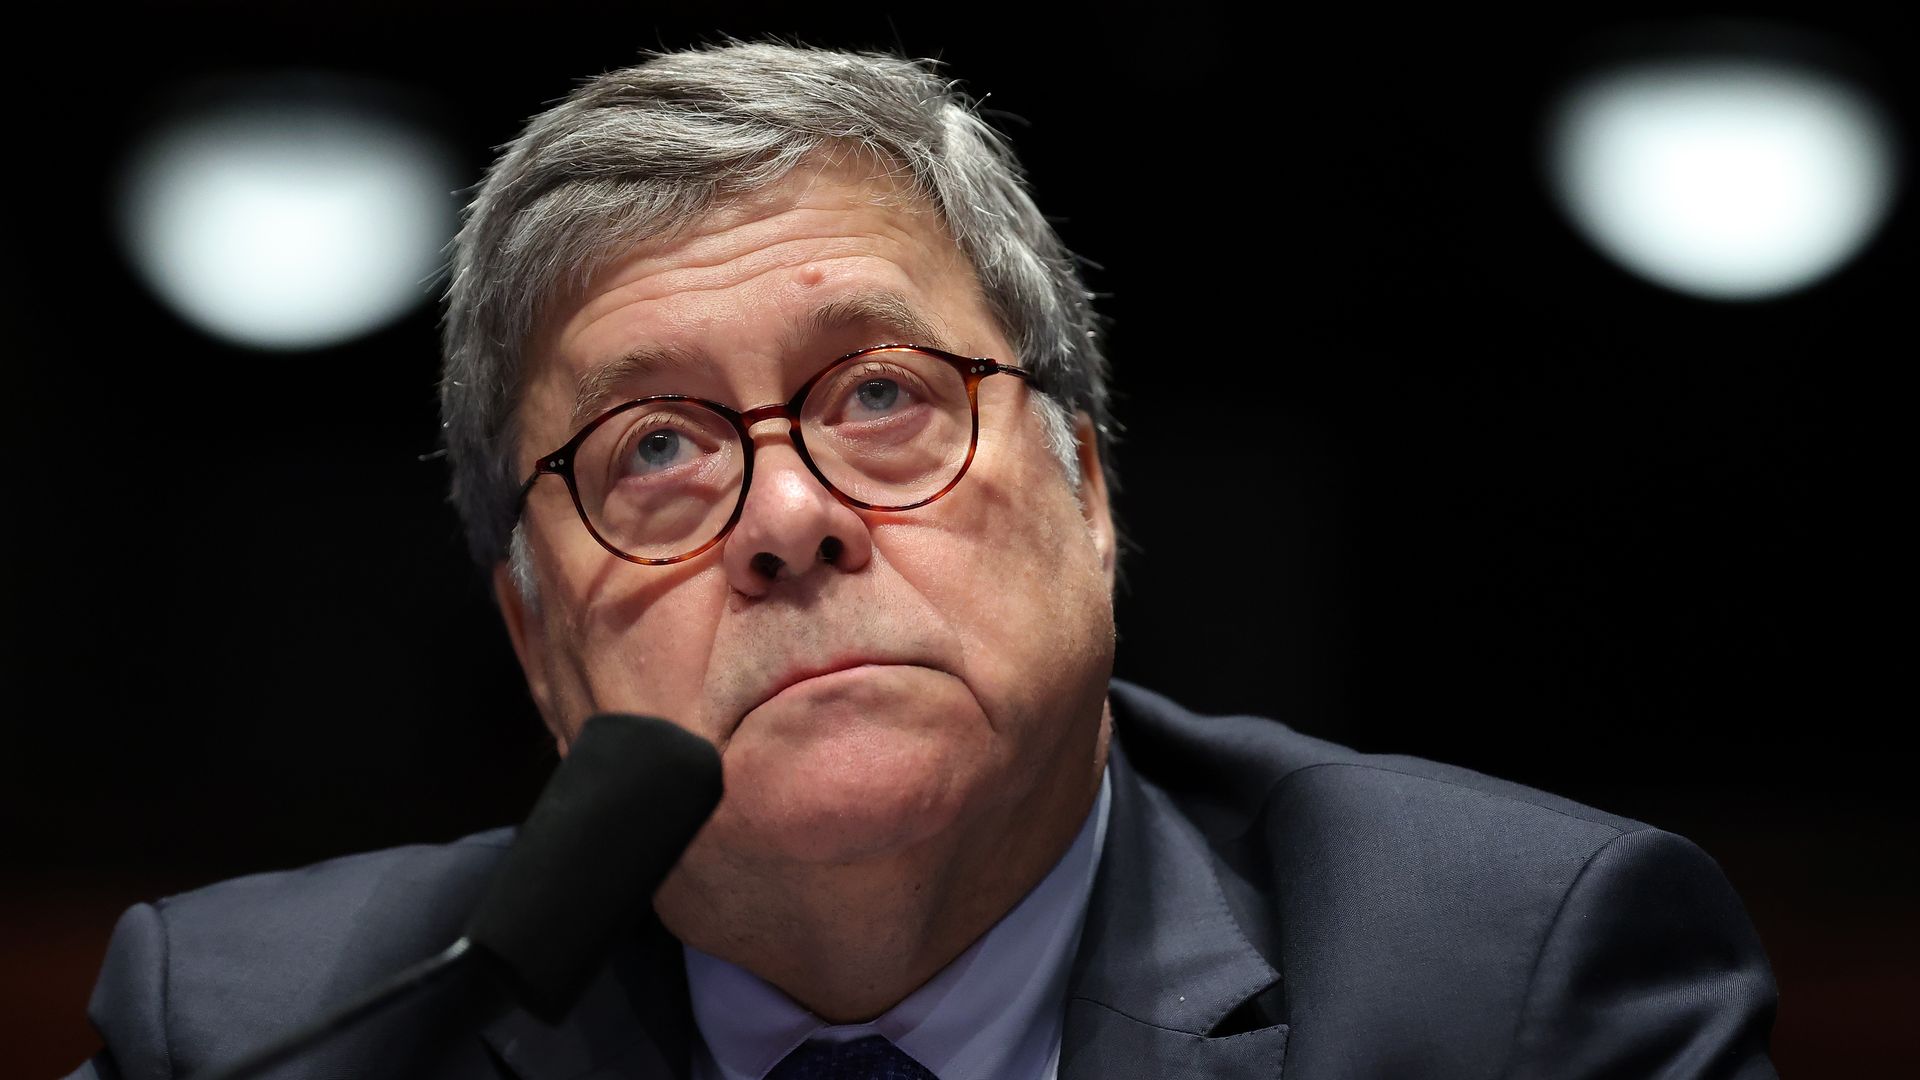 Attorney General William Barr testifies before the House Judiciary Committee in the Congressional Auditorium at the U.S. Capitol Visitors Center July 28, 2020 in Washington, DC.